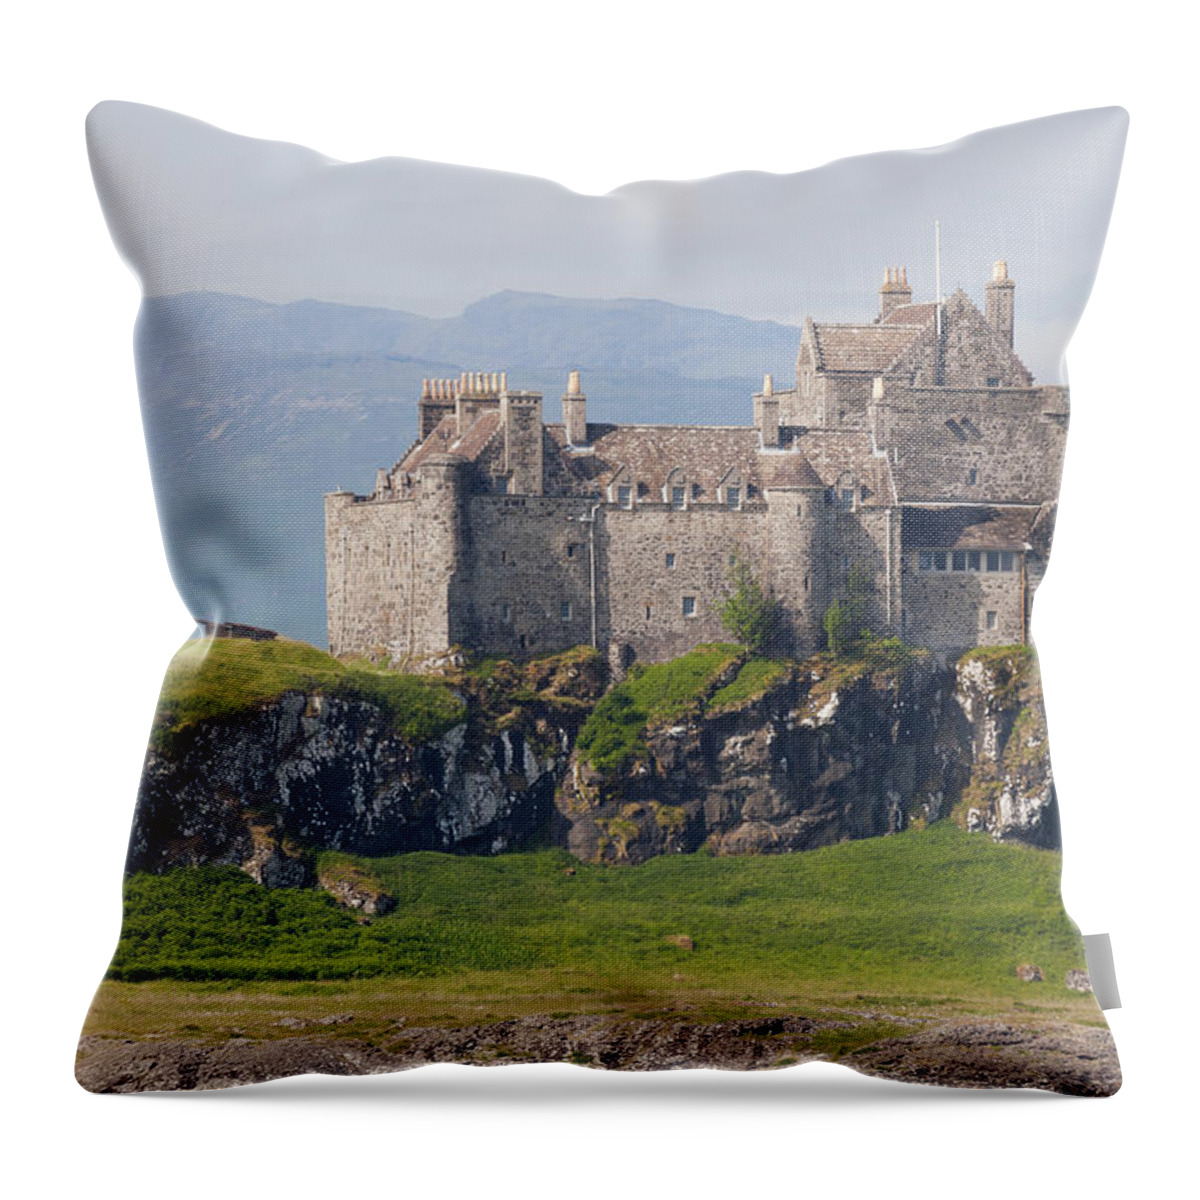 Duart Throw Pillow featuring the photograph Duart Castle by Ray Devlin